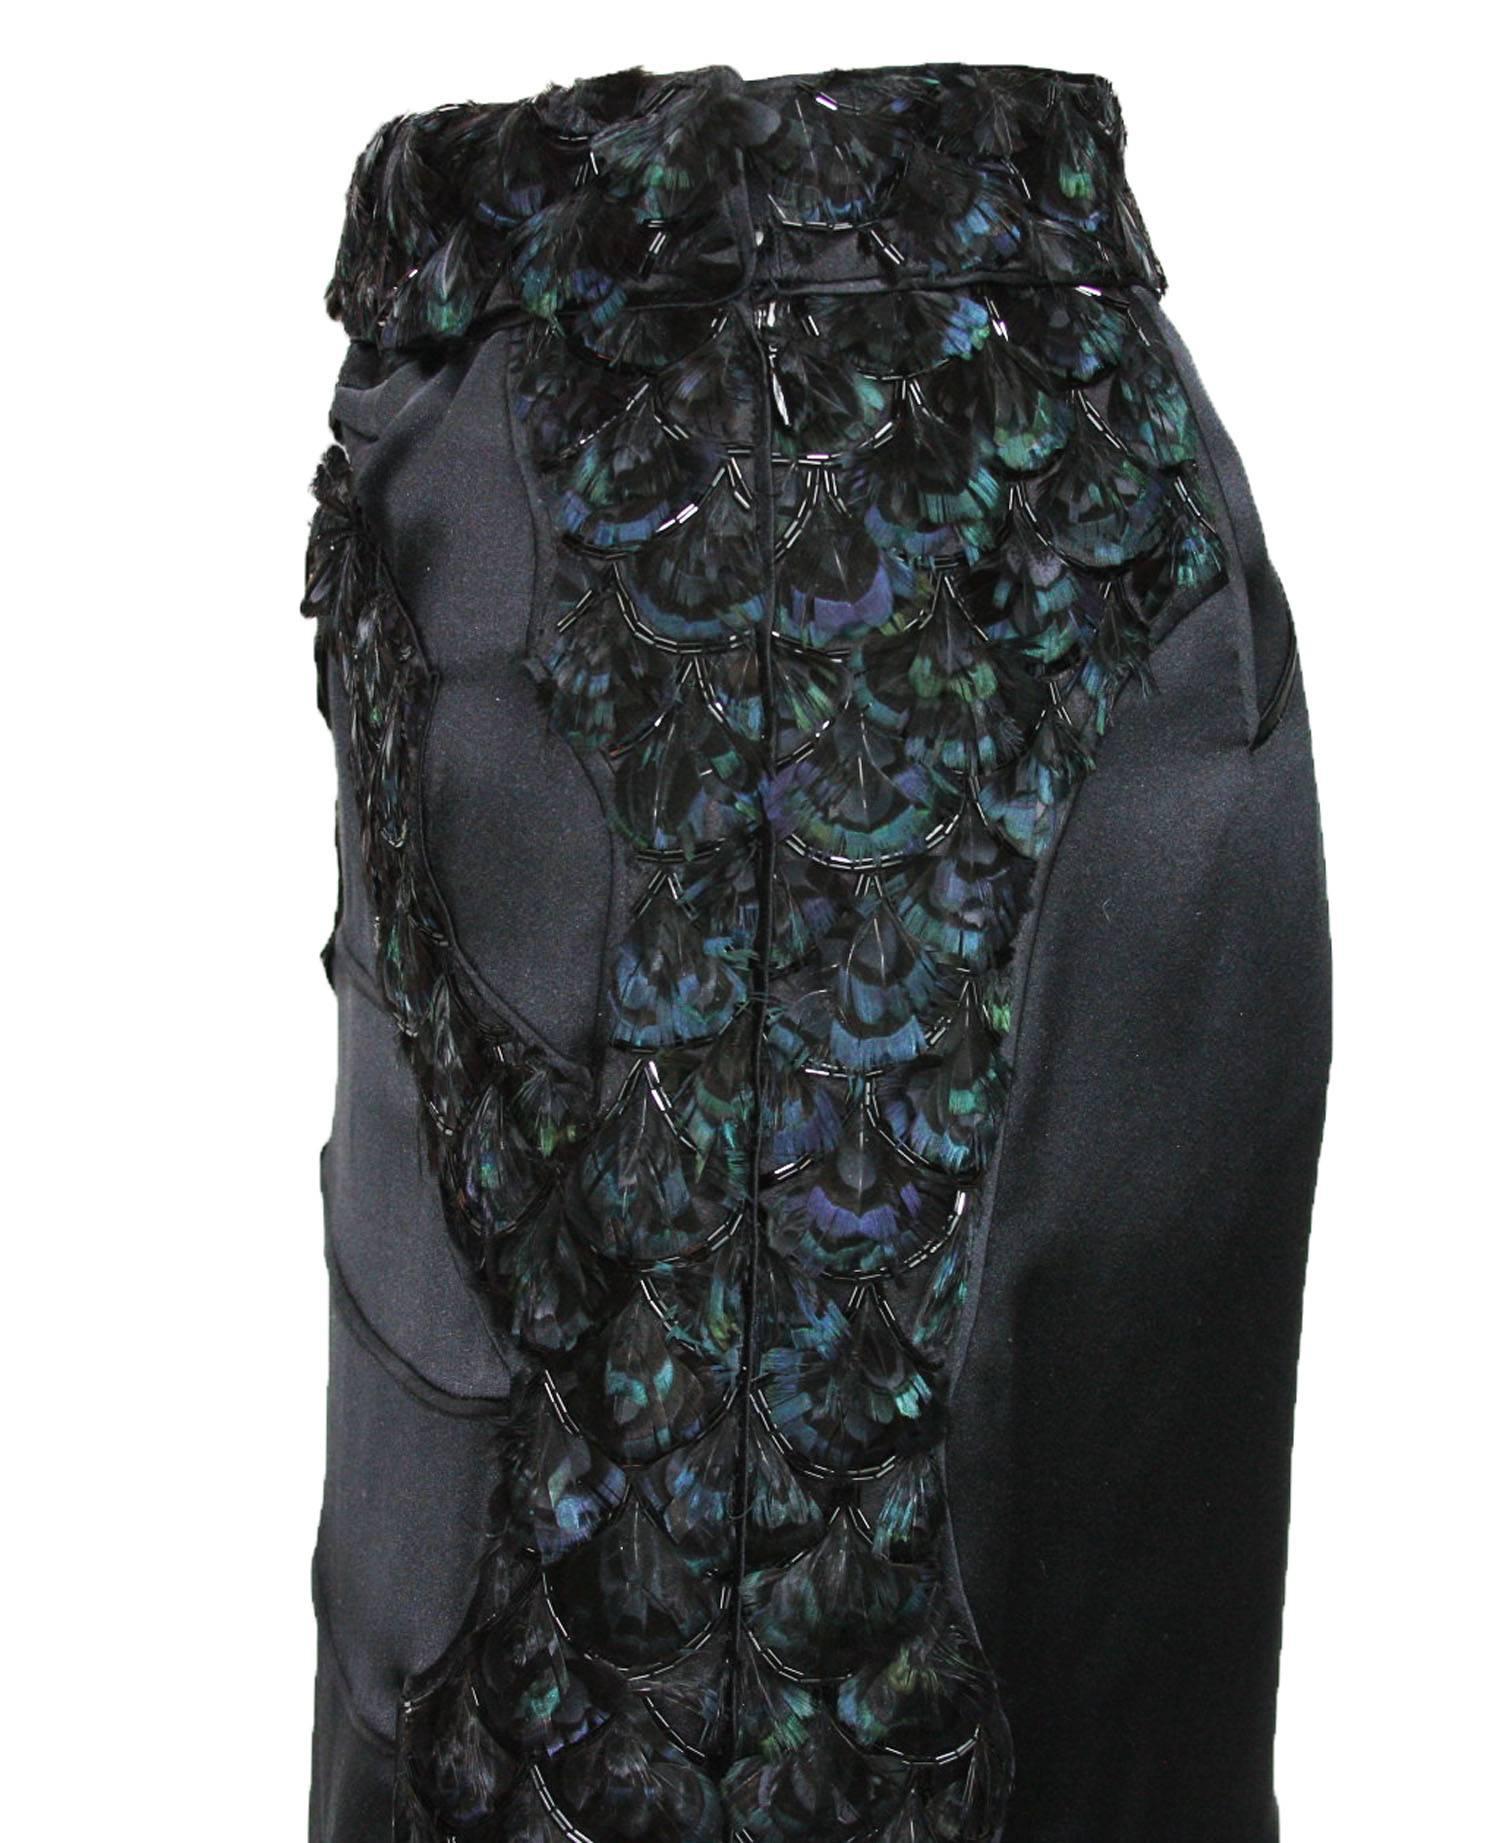 Tom Ford for Yves Saint Laurent F/W 2004 Beaded Feather Embellished Skirt 38 NEW 3